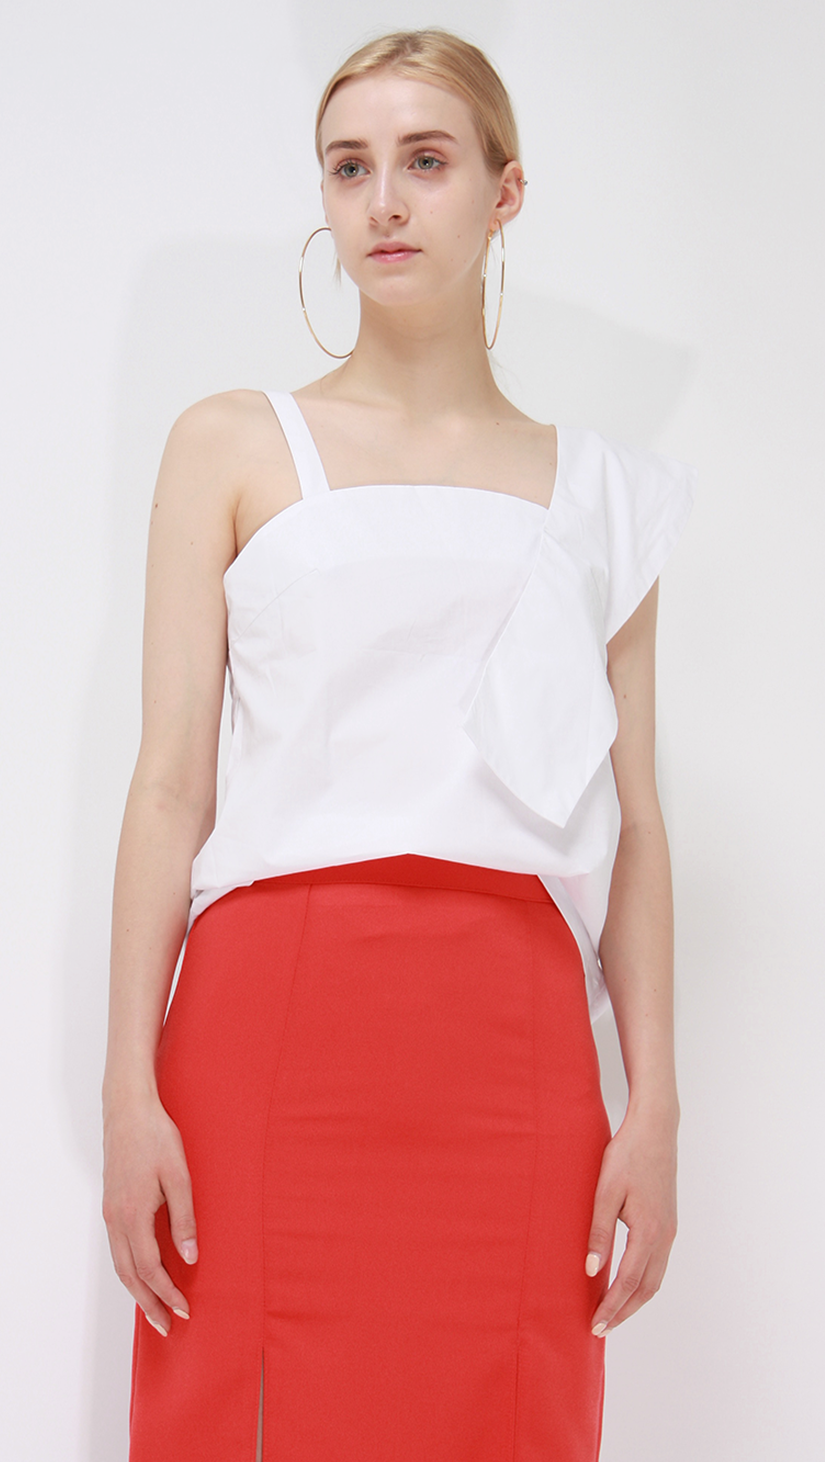 Yoshe Top, a lightweight top in White